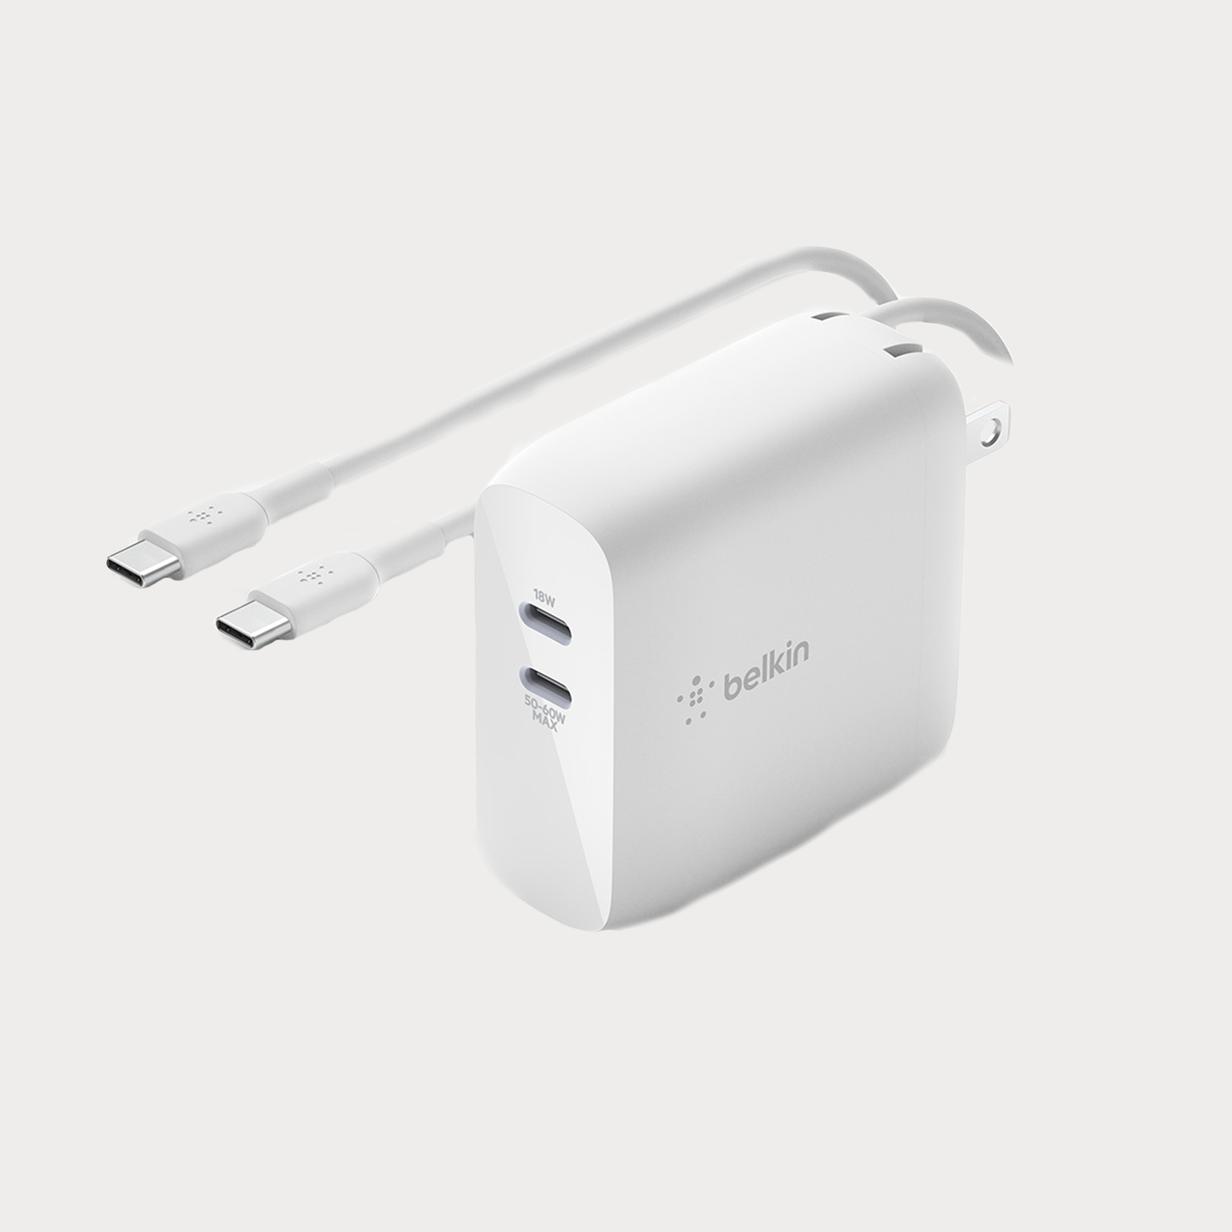 Moment Belkin WCH003 DQ2 MWH B6 68 W Boost Charge Dual USB C Ga N Wall Charger 02